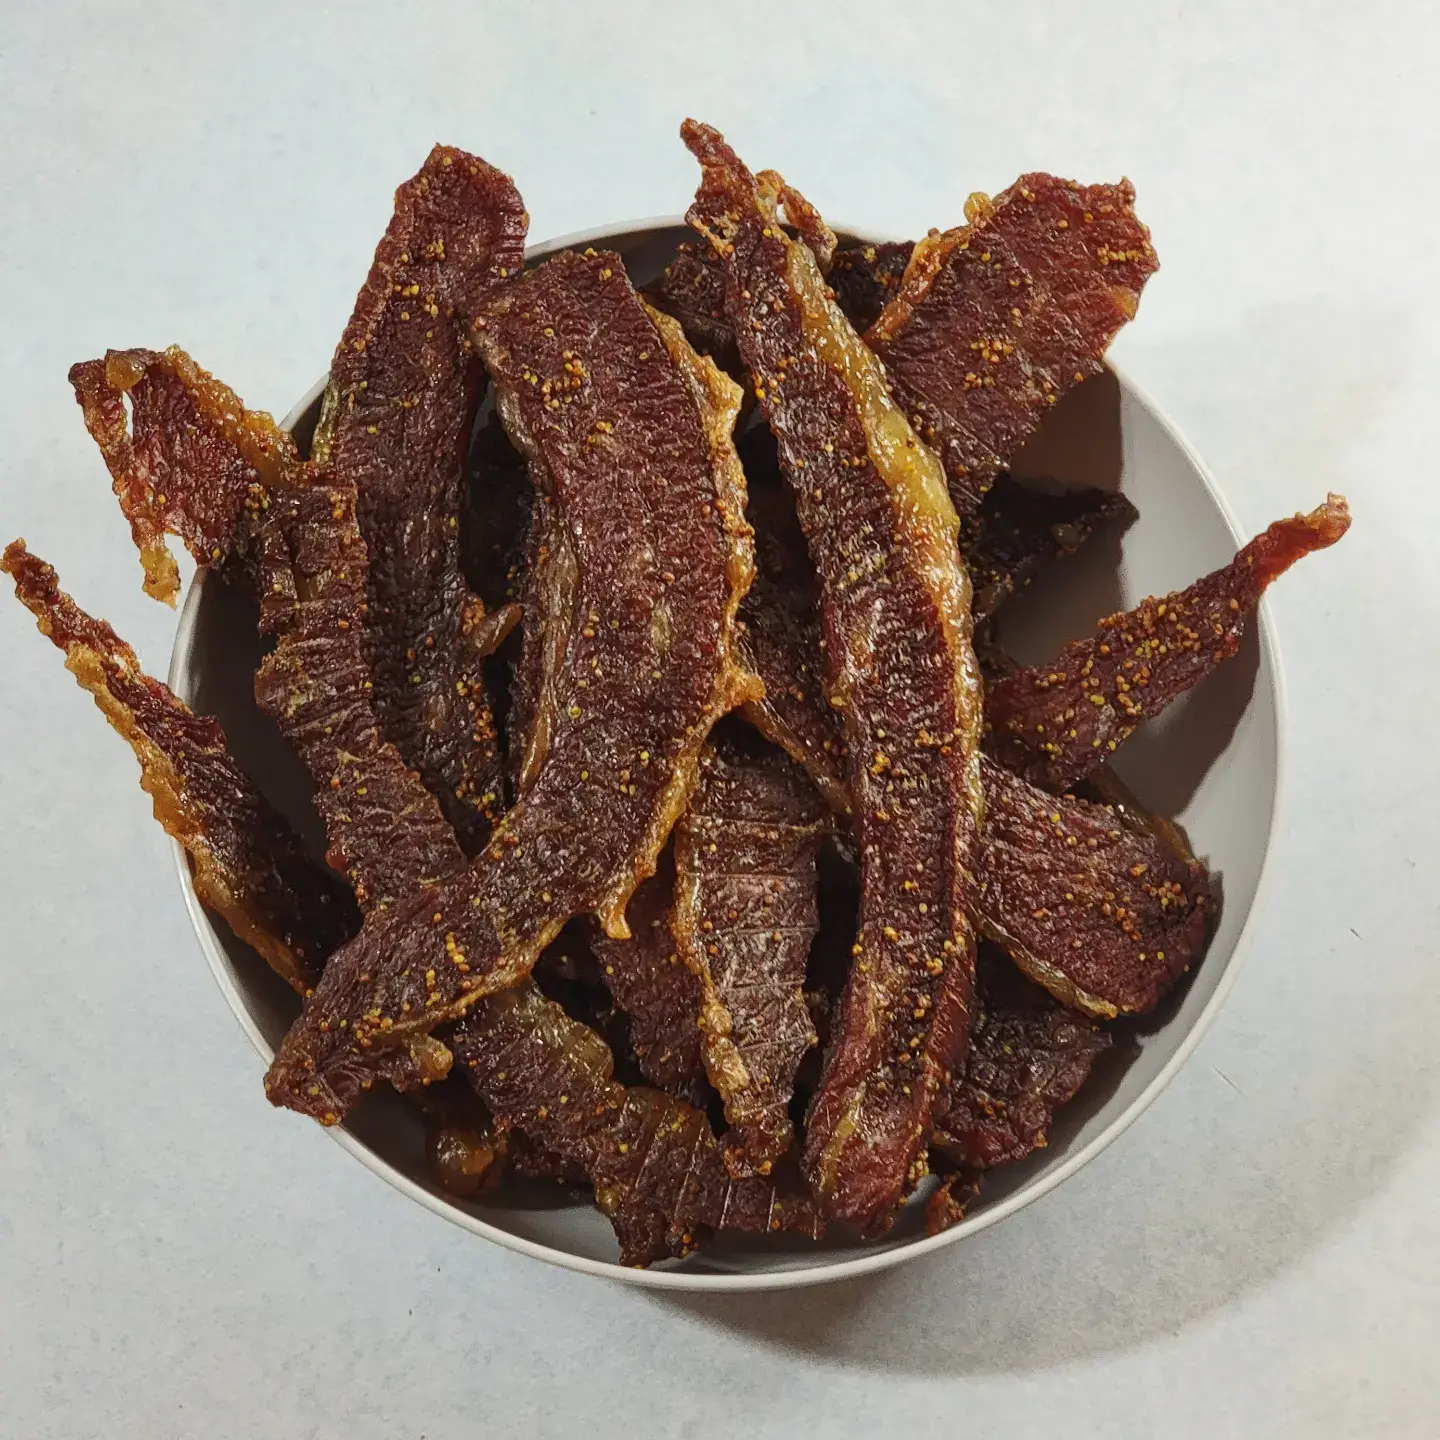 Bowl filled to the brim with corned beef jerky. The color is a deep maroon with a slightly shiny surface dotted with mustard seeds. On most of the slices, there is a gleaming rind of of fat.